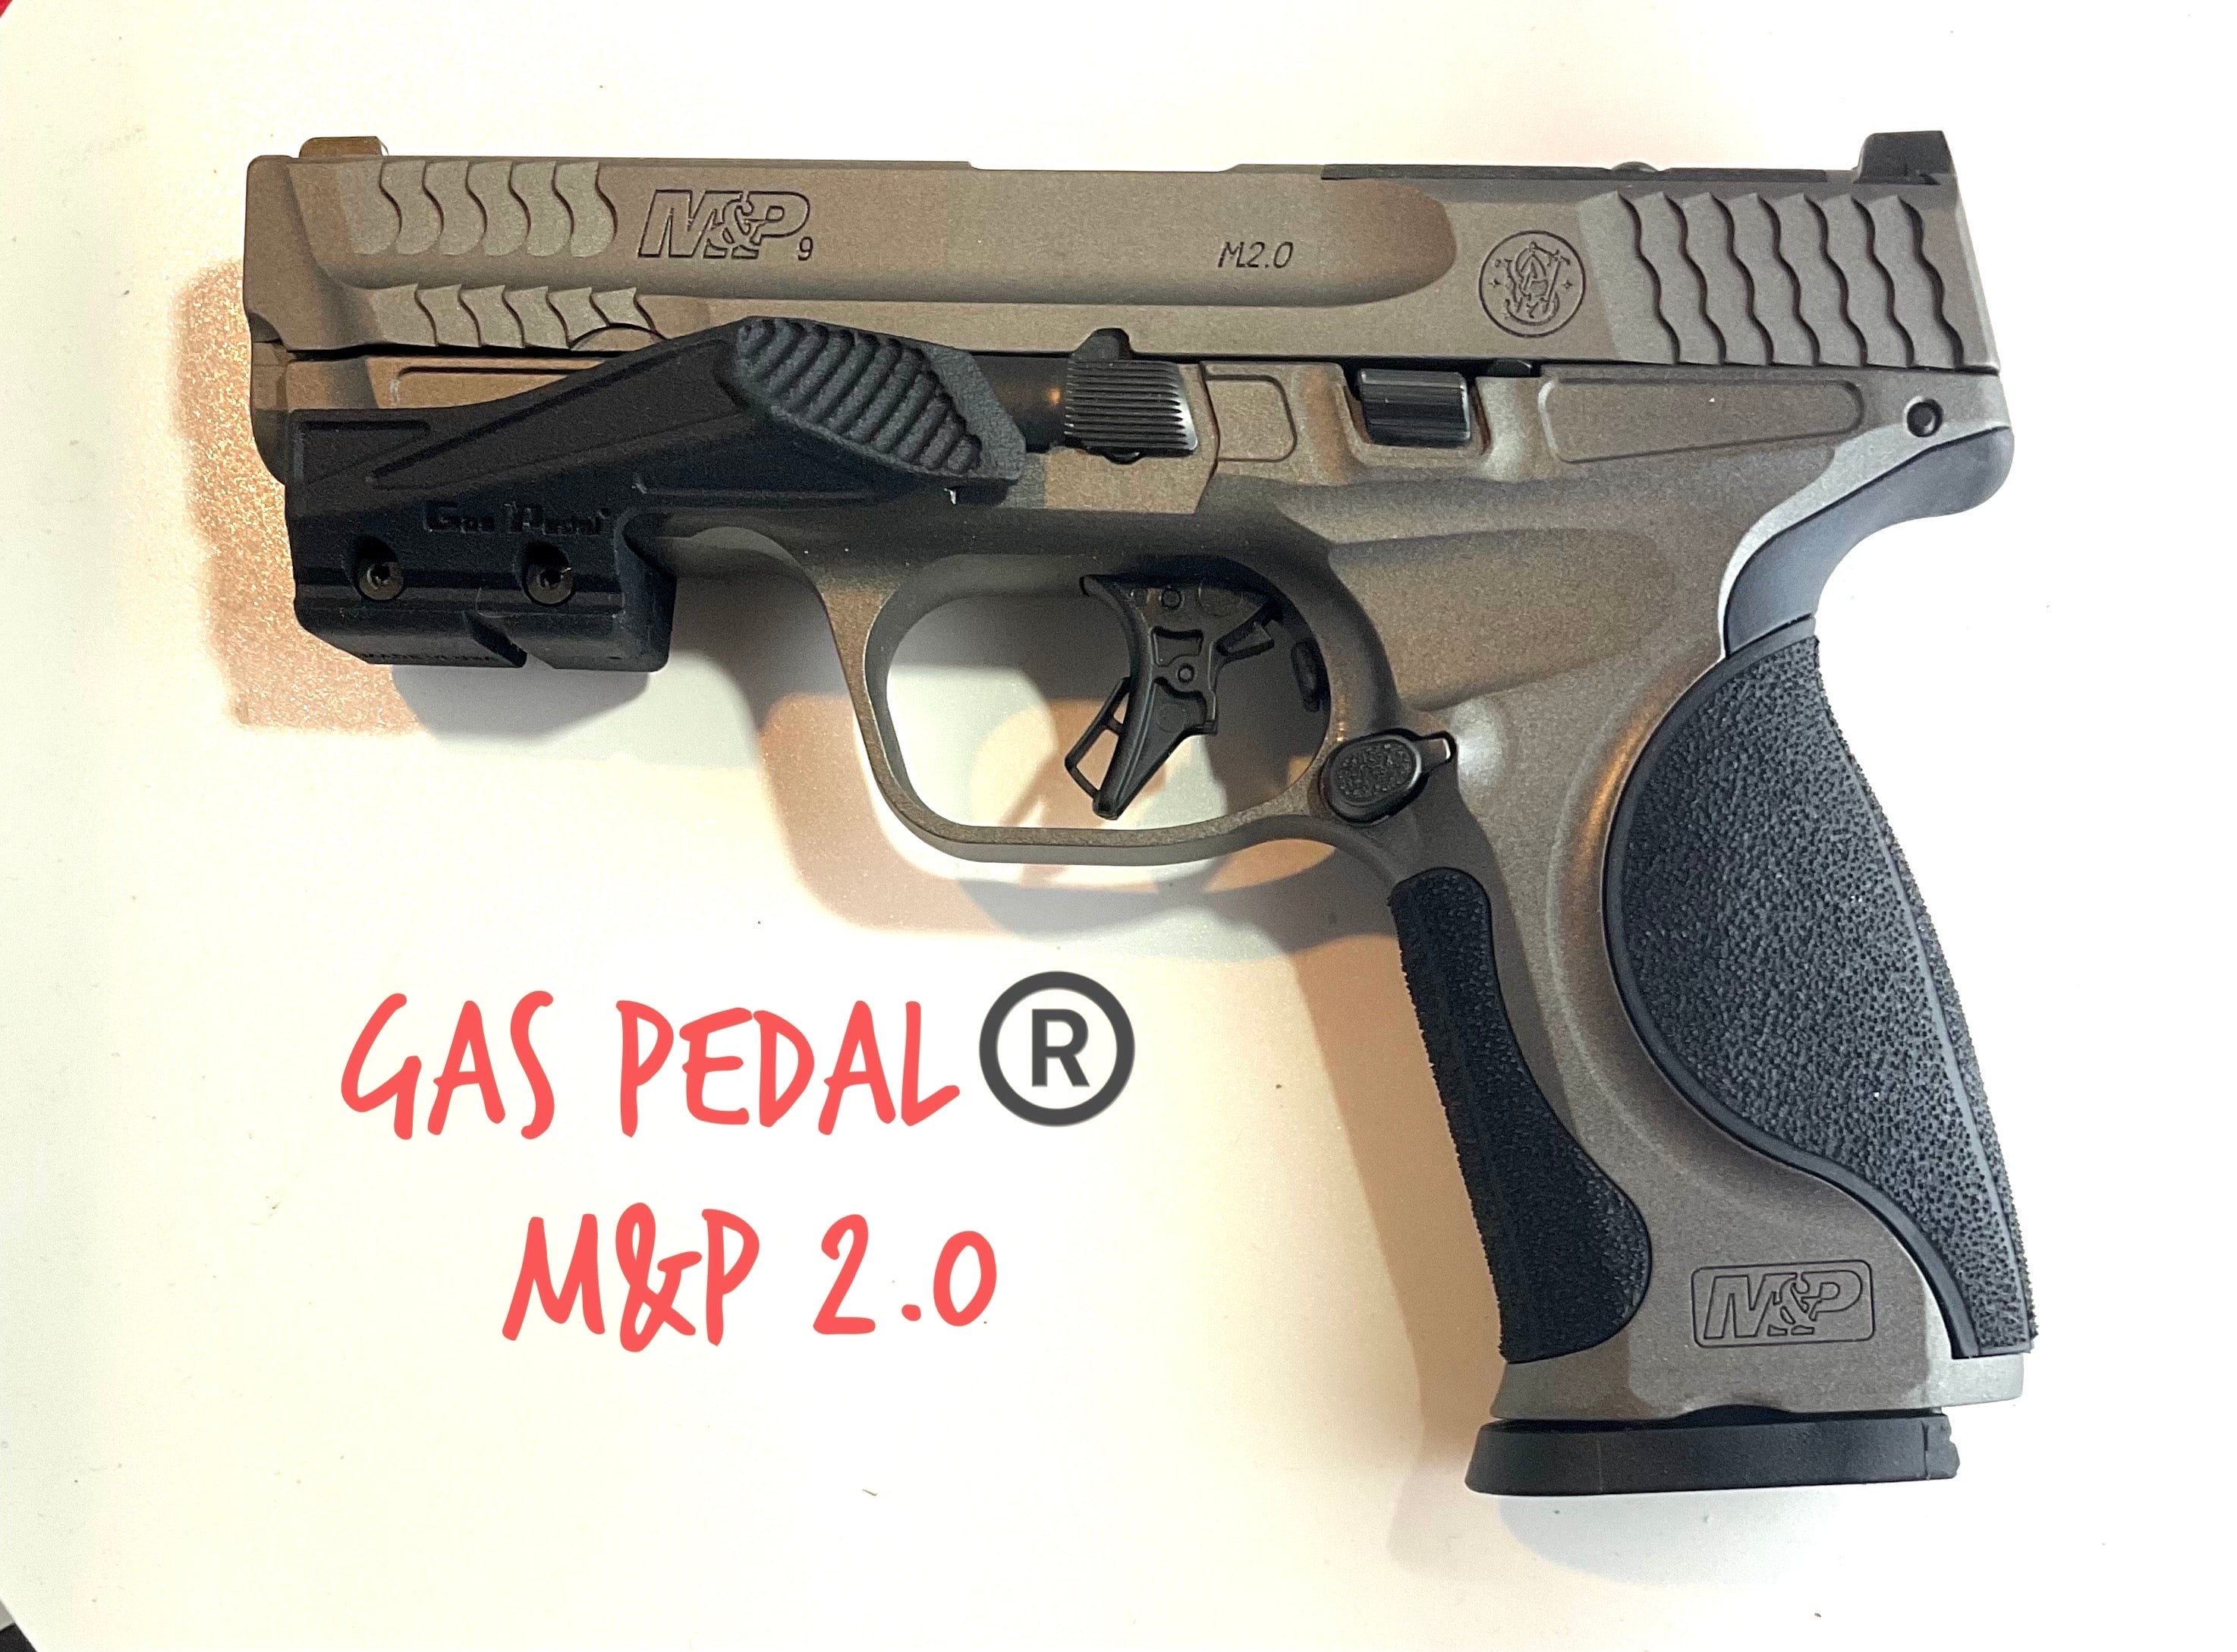 Gas Pedal® on M&P 2.0